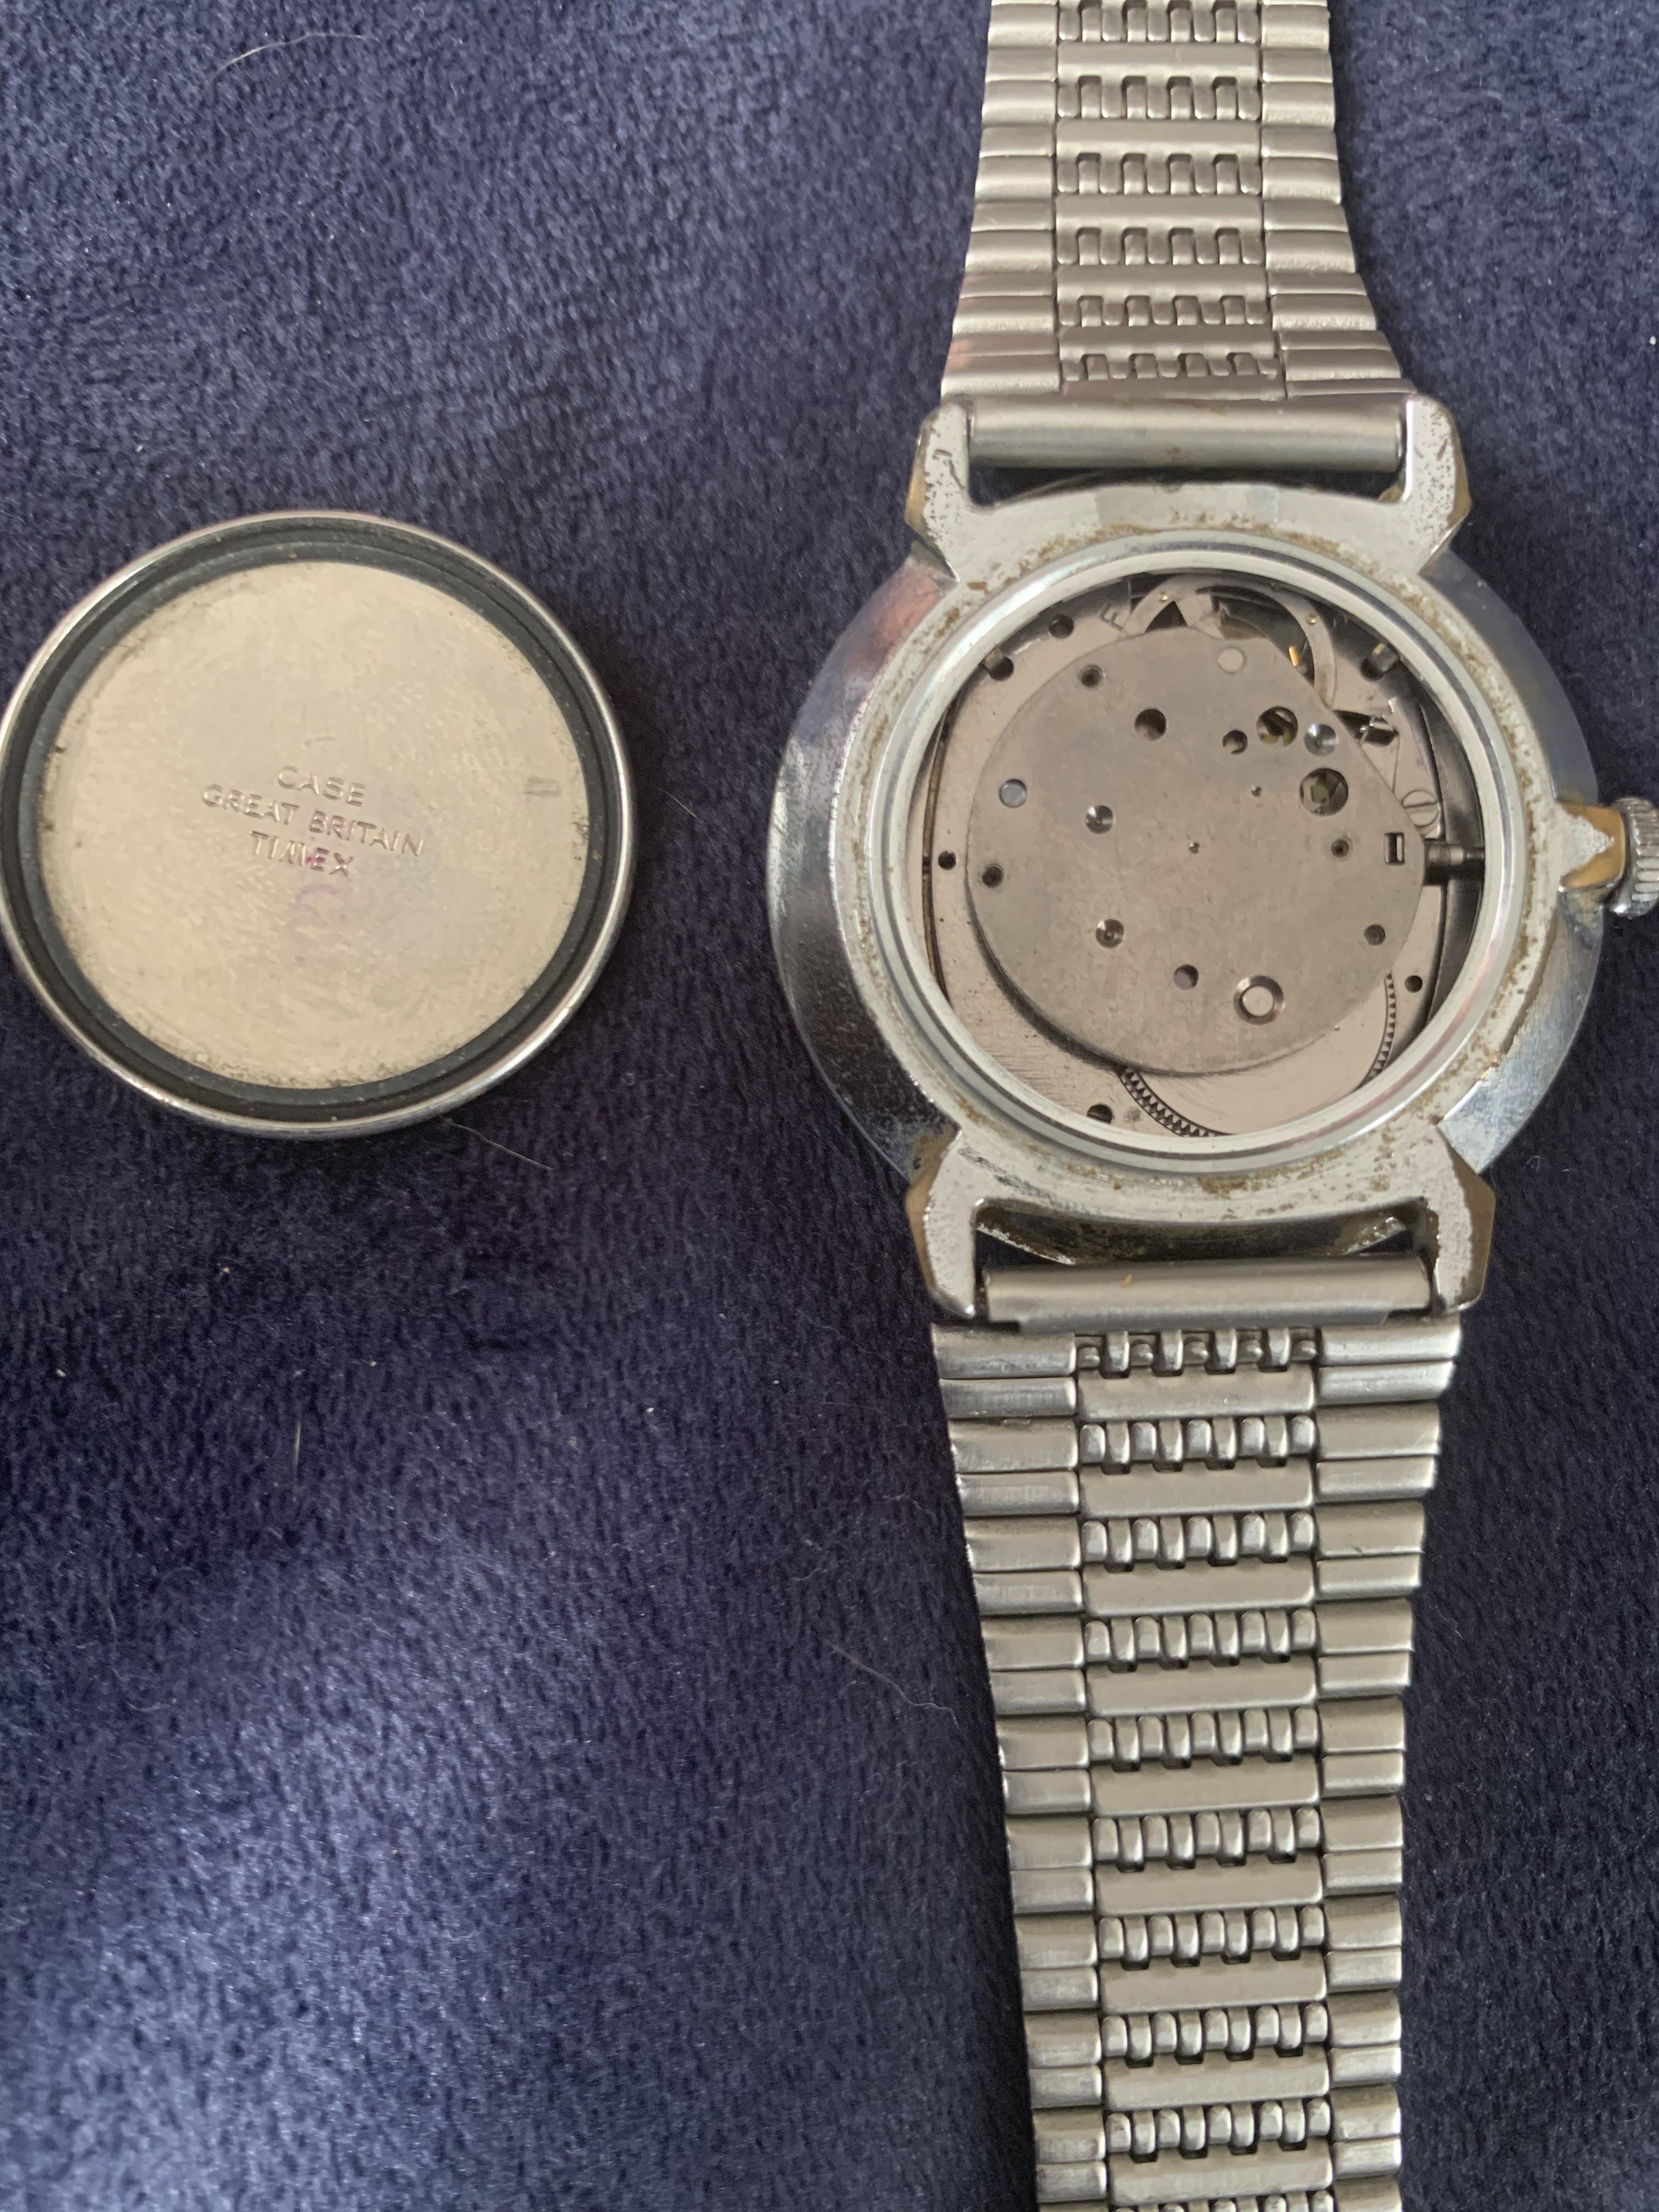 What to do with my Timex Marlin ? - Watch Repairs Help & Advice - Watch ...